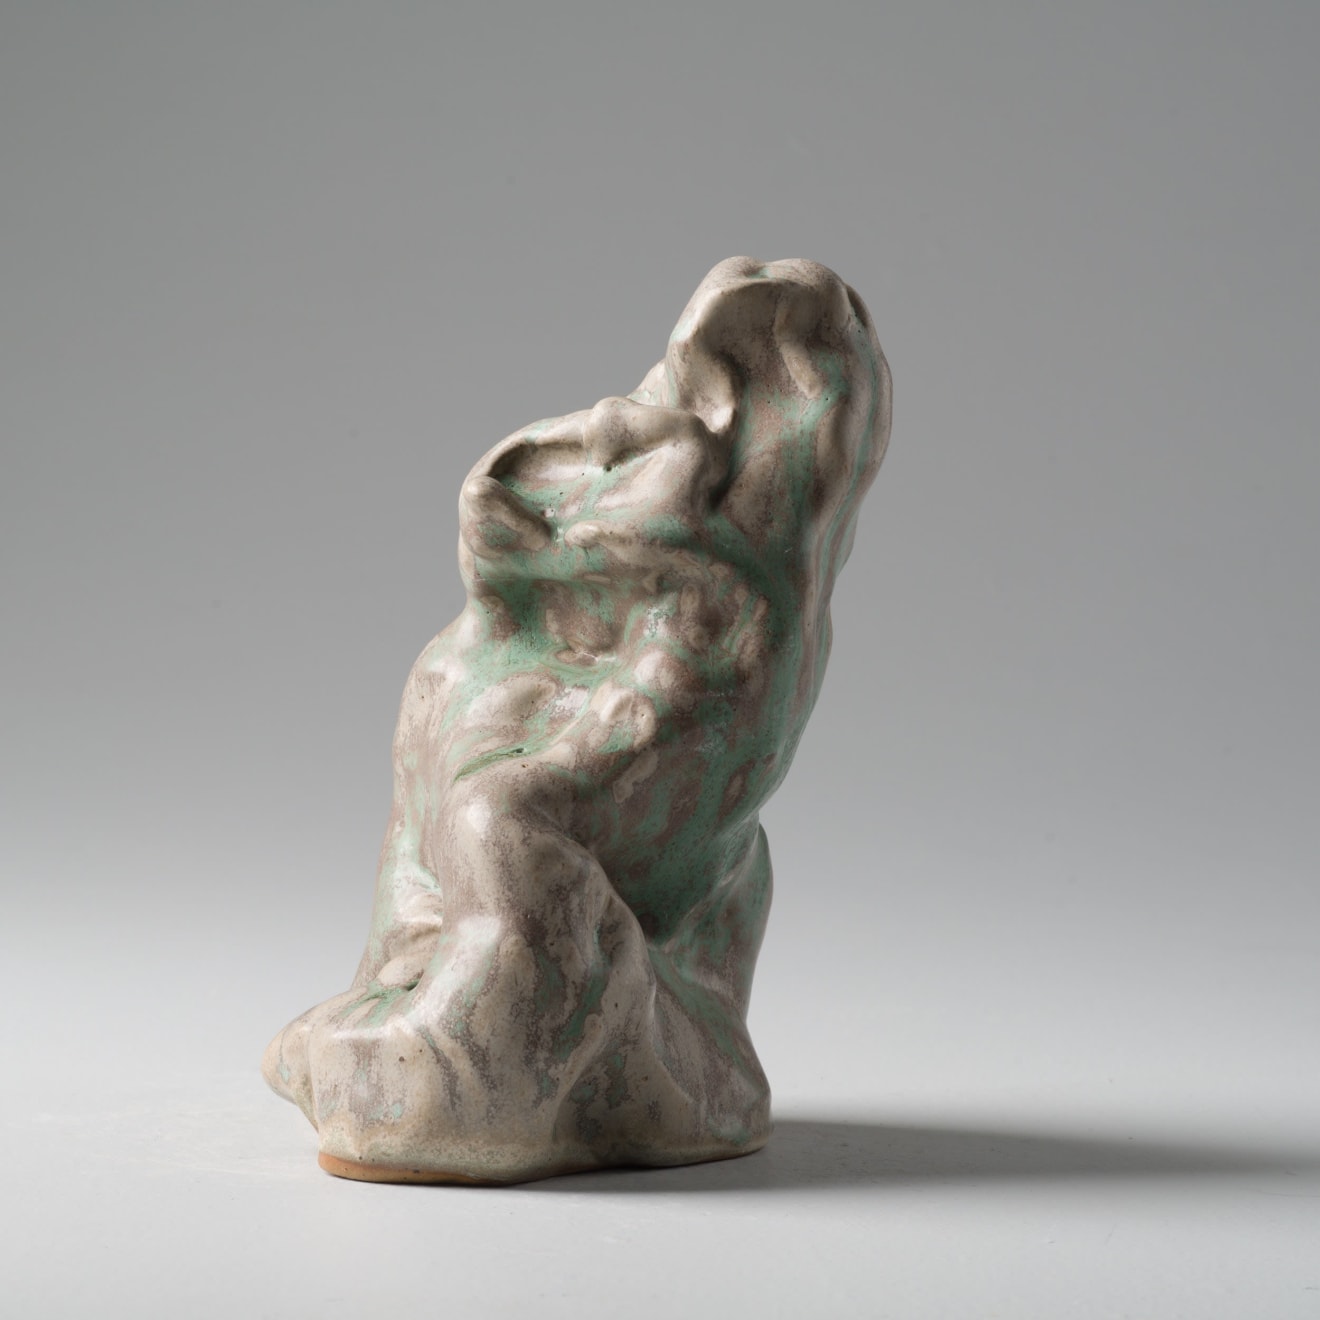 V5 dido Sculptural From Glaze on Stoneware 20 x 12 x 8 cm AUD $900